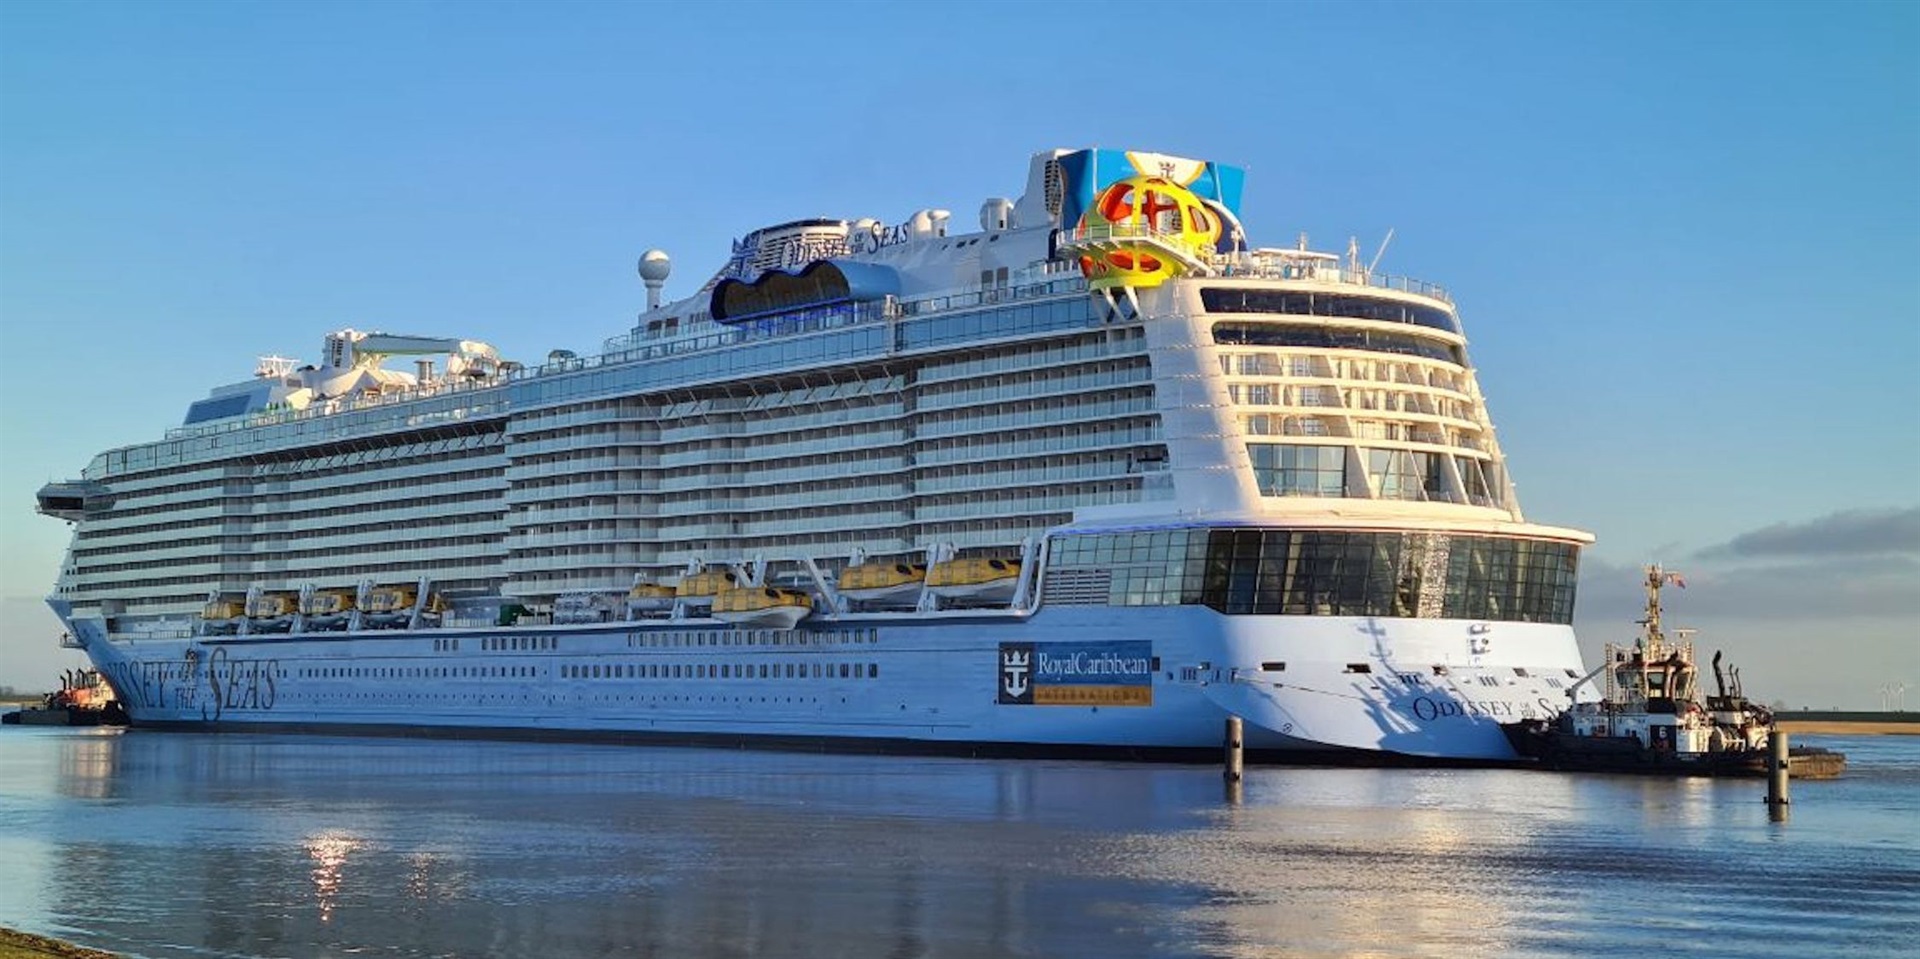 TAKE A LOOK | Royal Caribbean just welcomed its newest ship, the